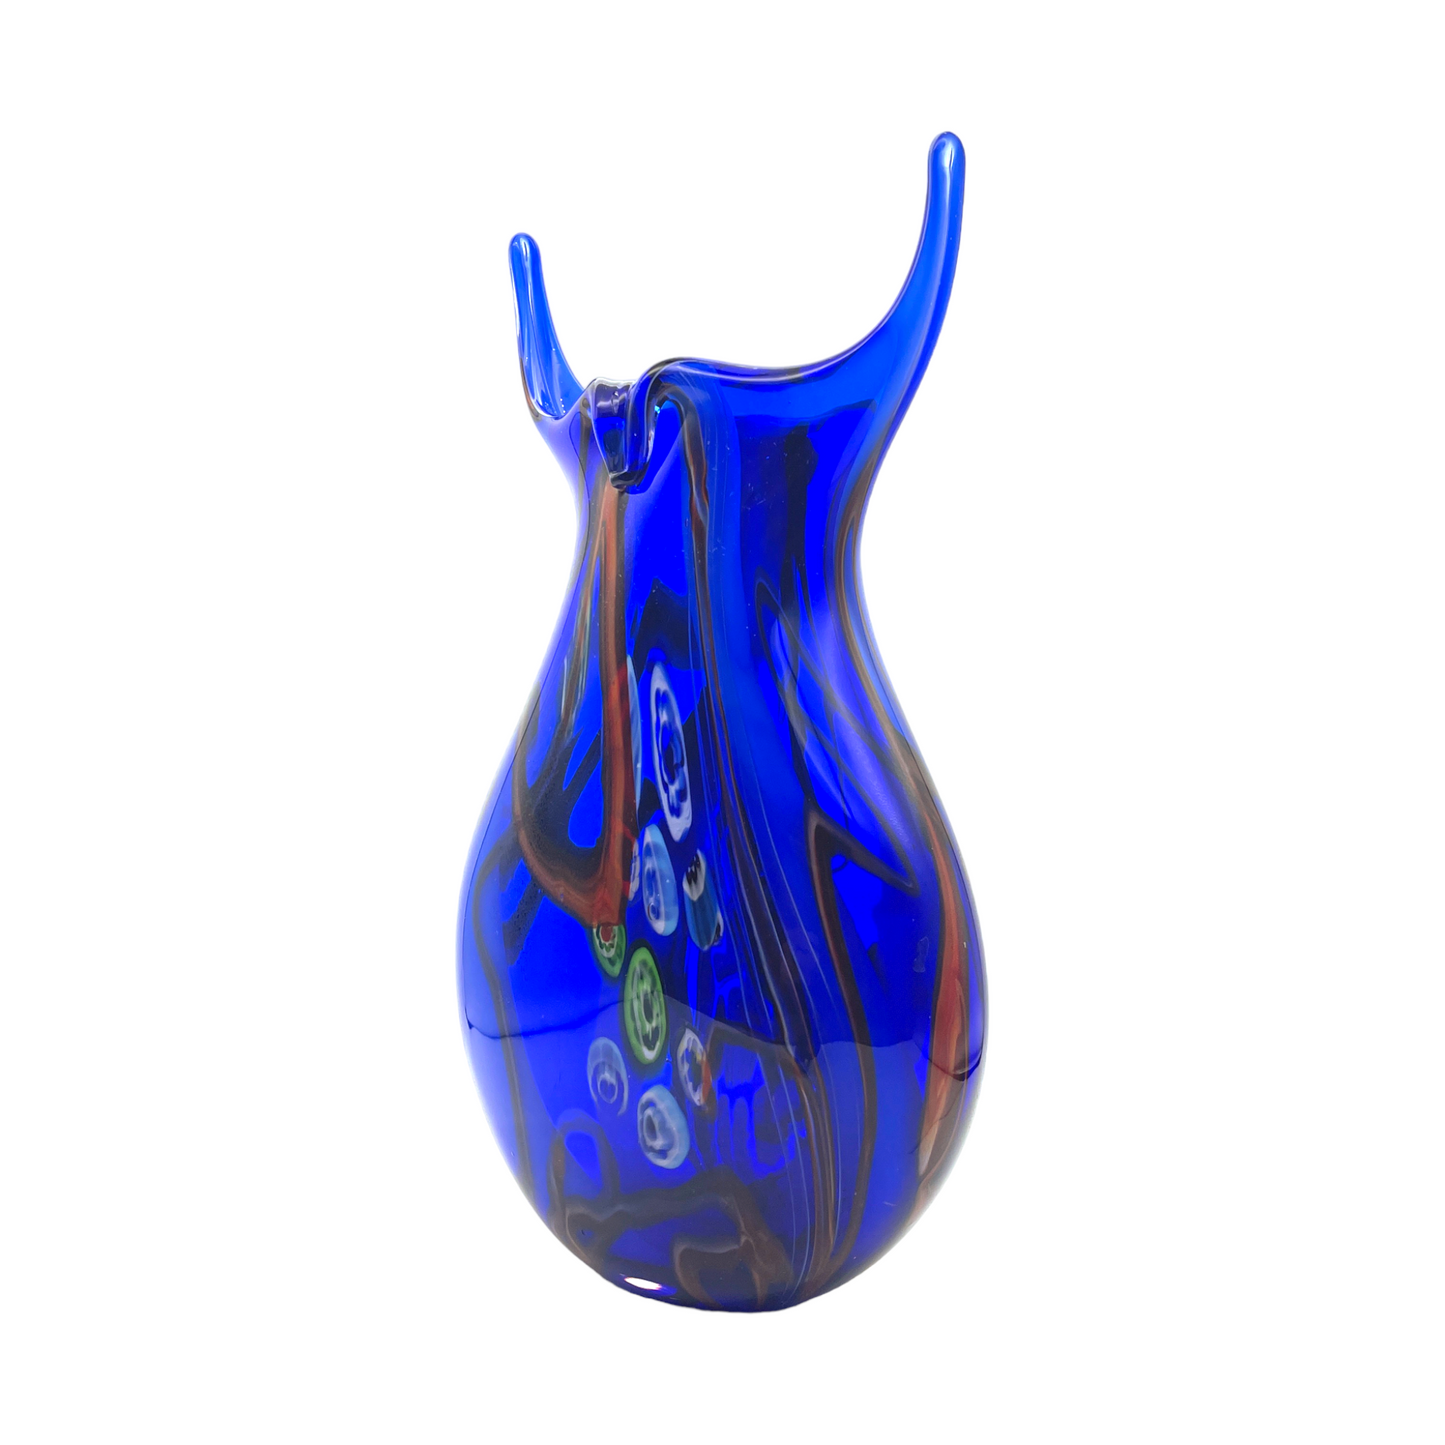 Murano Art - Enchanting Azure Dreams Glass Vase with Assorted Decorations - 12"